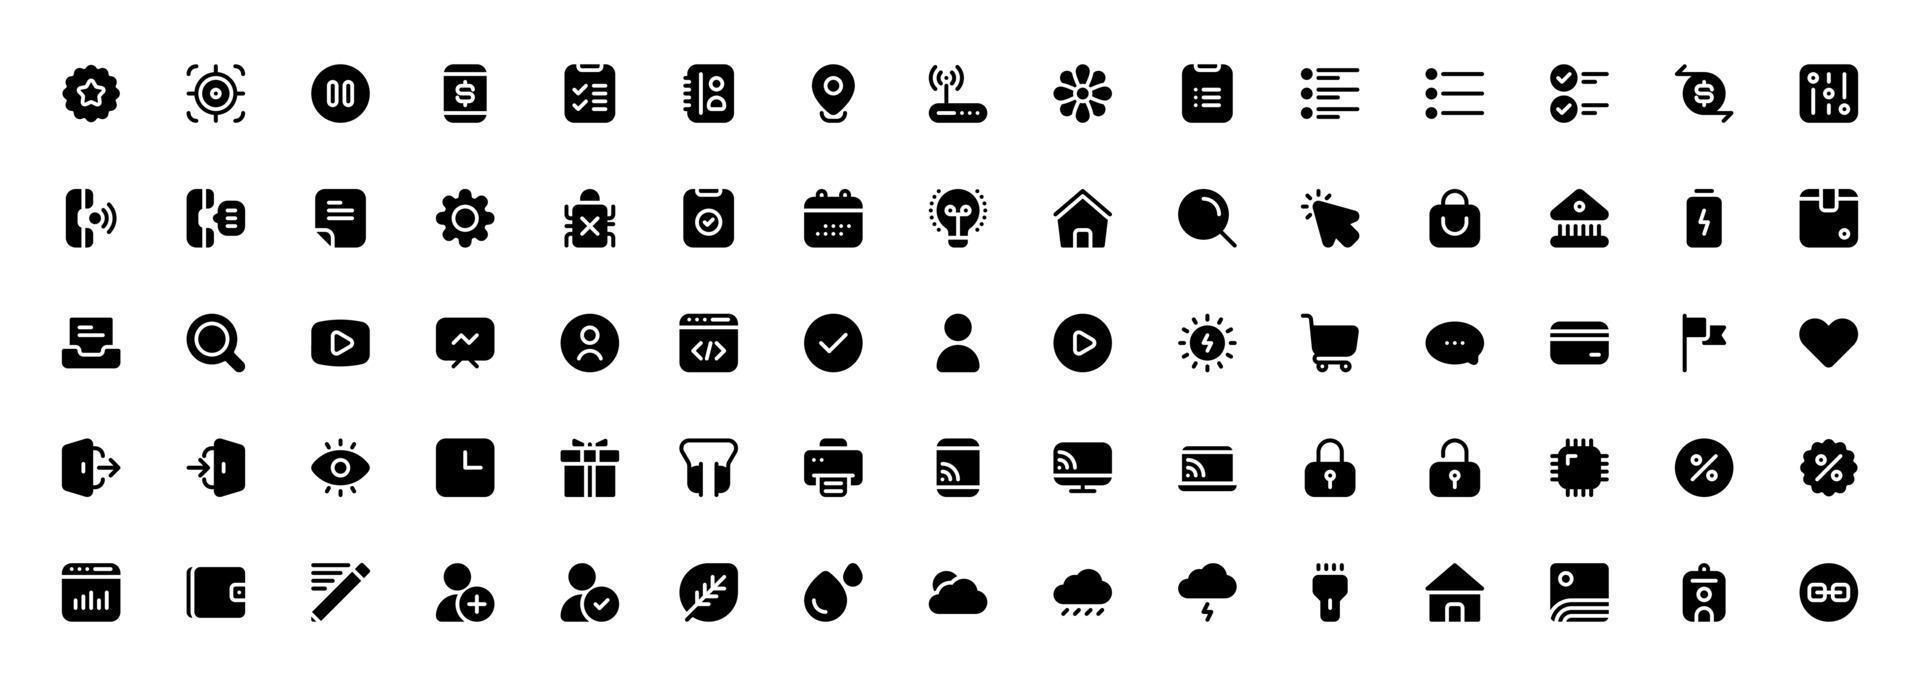 Miscellaneous Icon Set Solid Style. User Interface, Finance, Banking, Nature And More vector